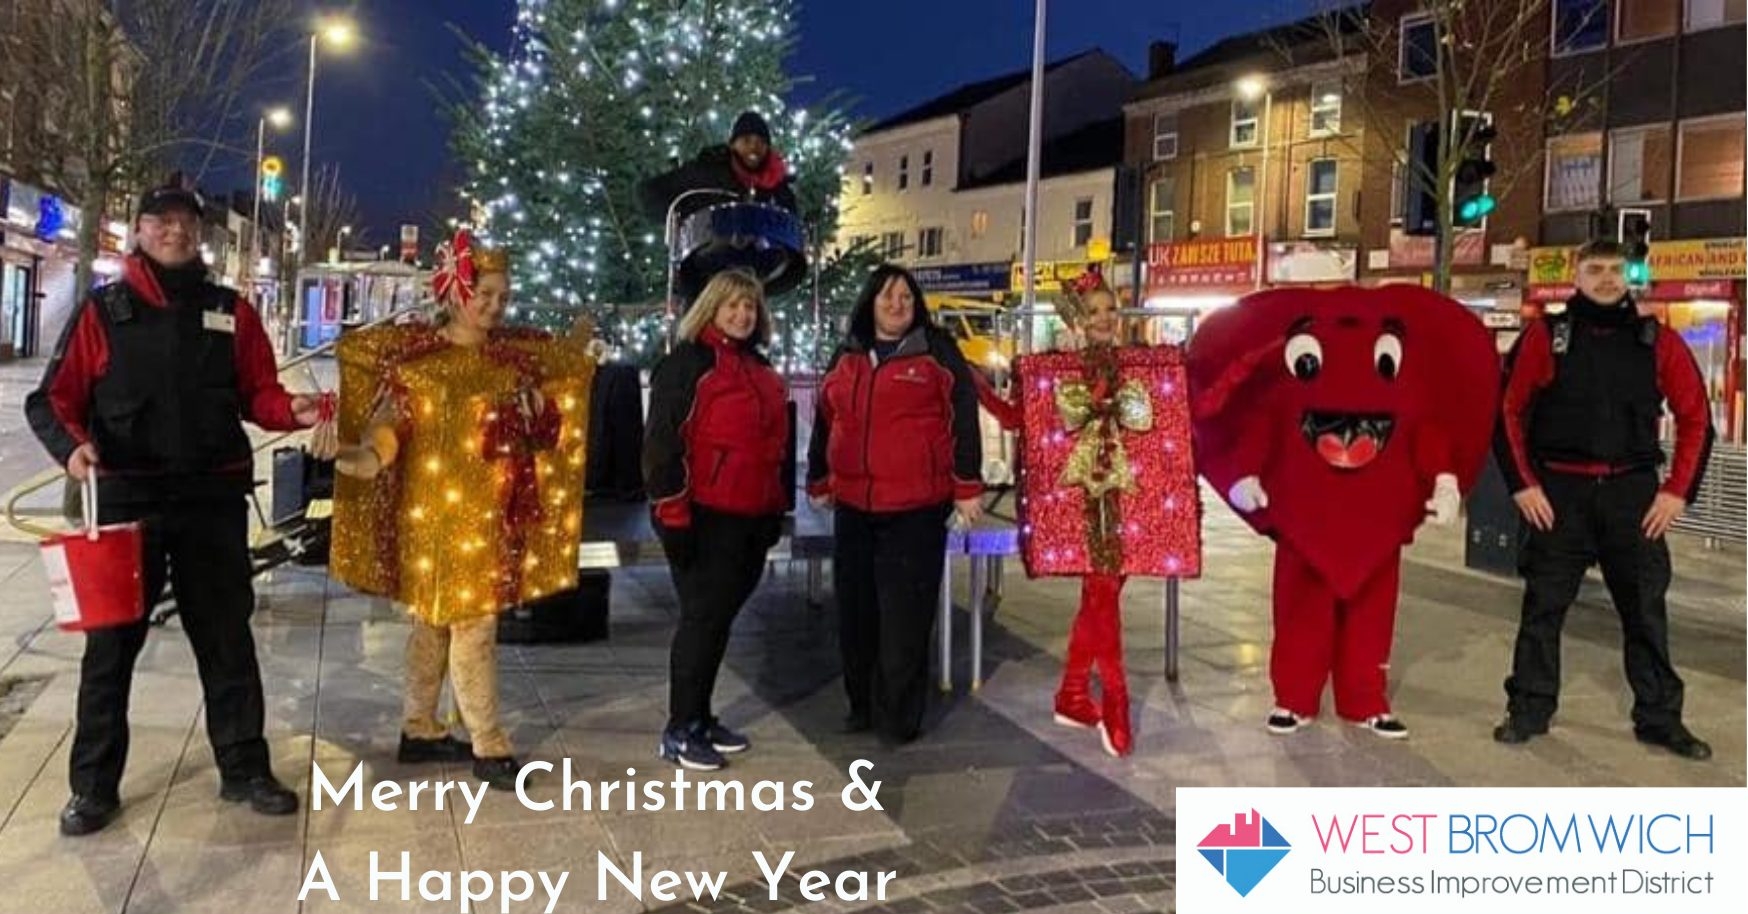 Merry Christmas & A Happy New Year from West Bromwich BID